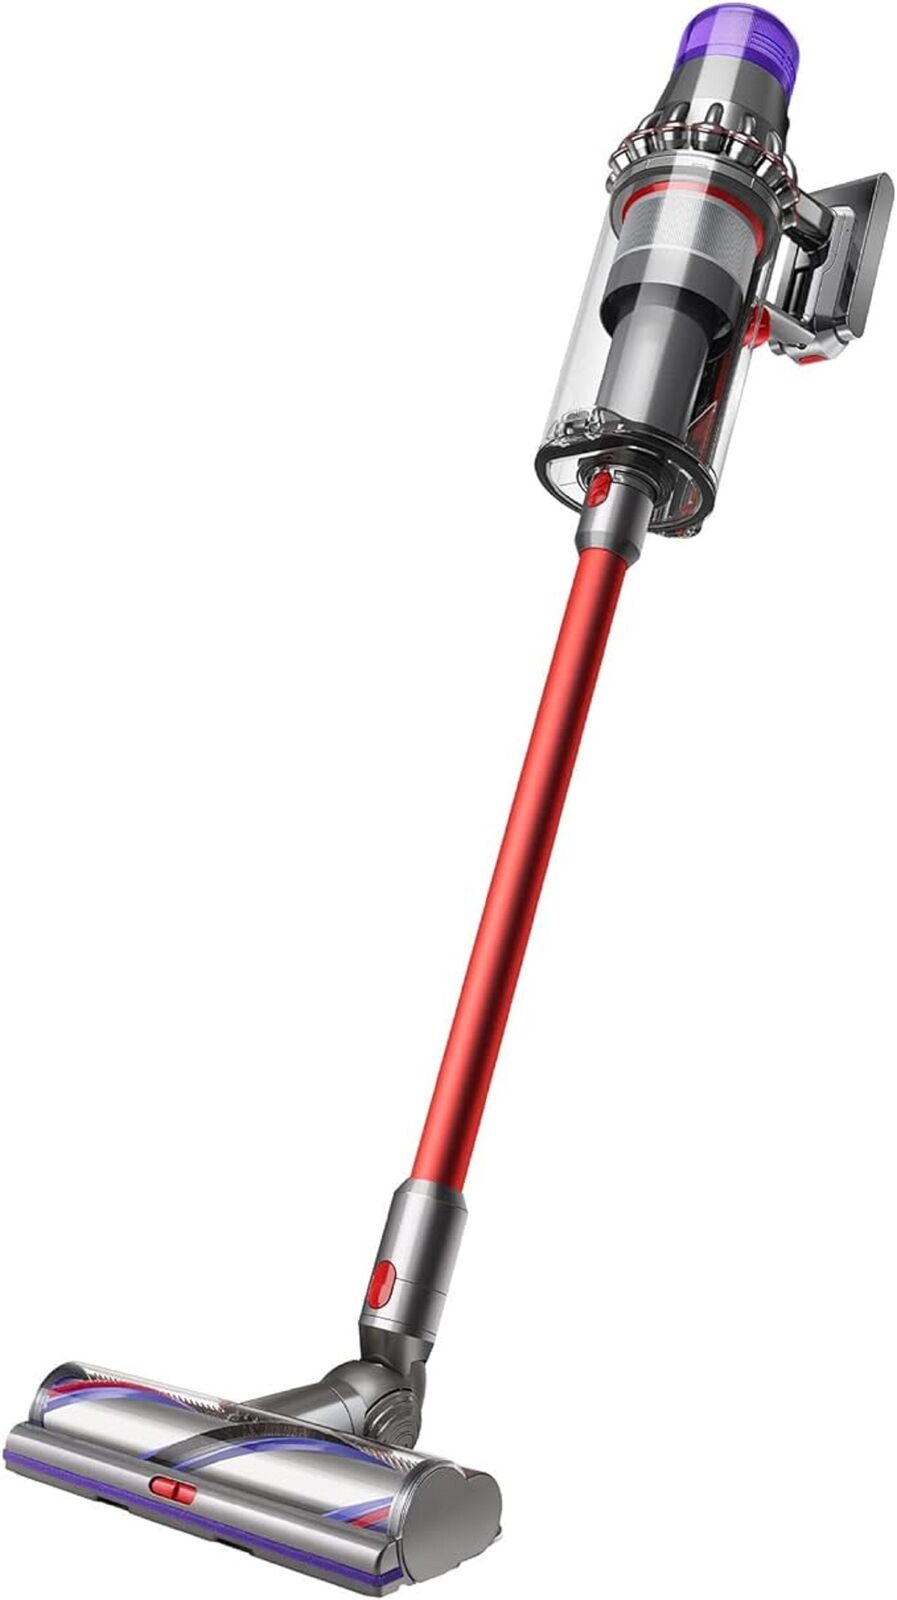 Dyson 447922-01 Outsize Cordless Vacuum Cleaner, Nickel/Red, Extra Large